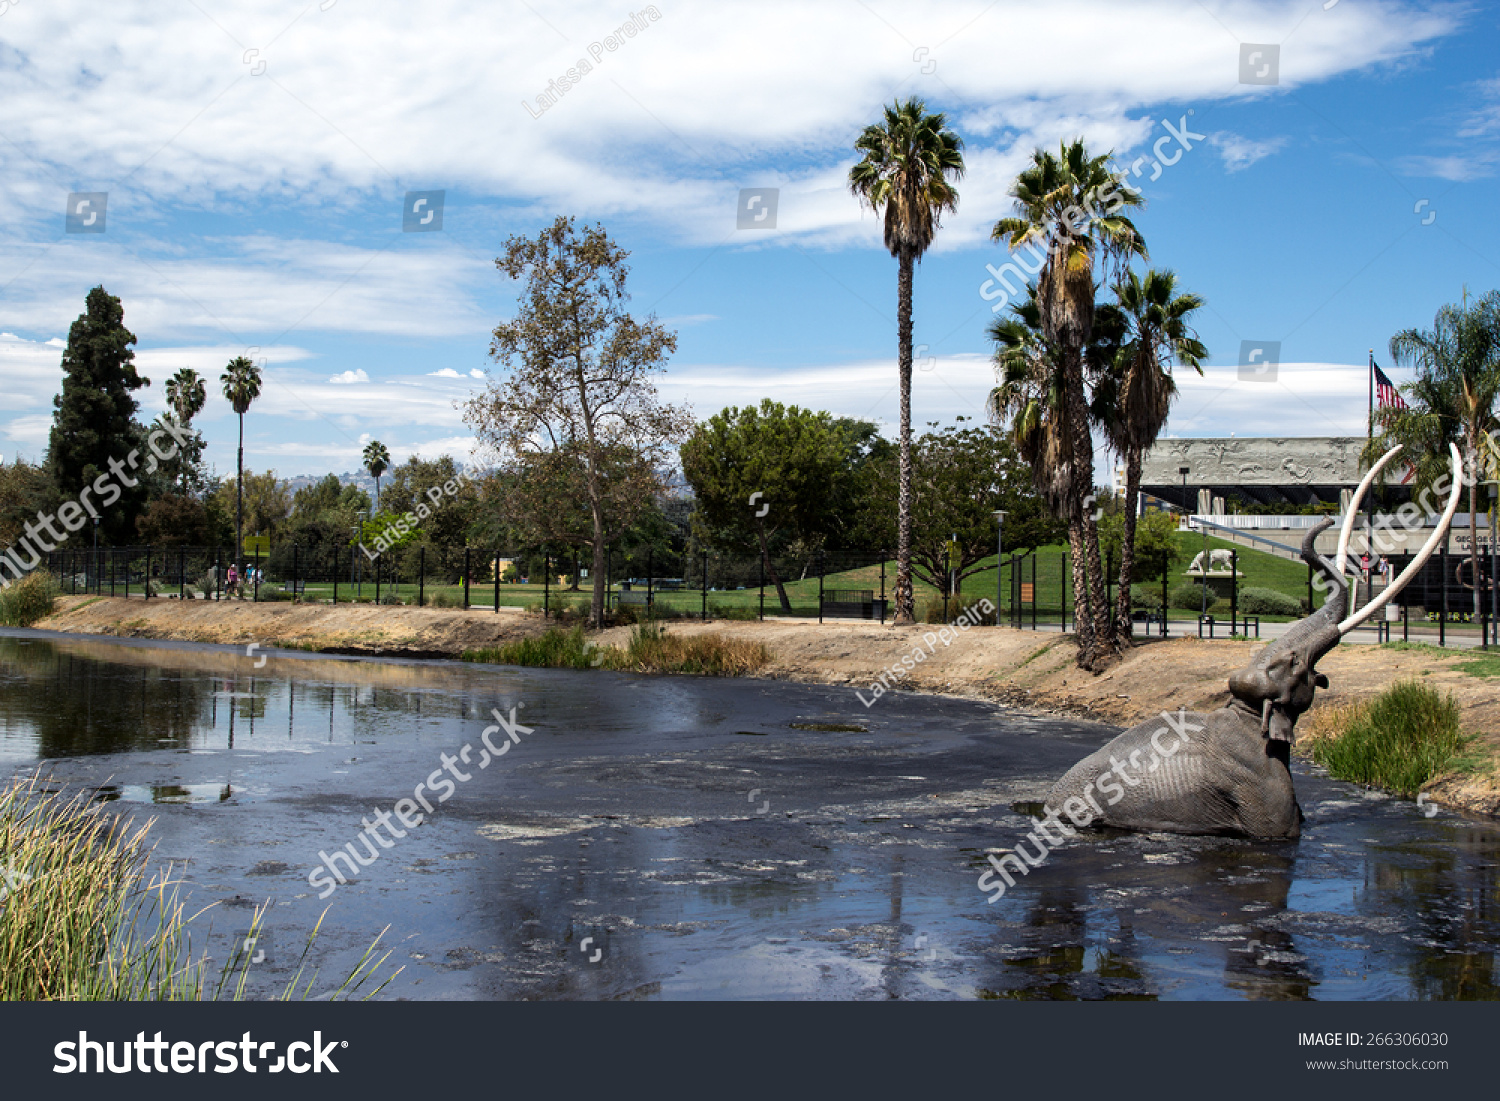 Mammoth sculpture at the La Brea Tar Pits in Los Angeles #266306030